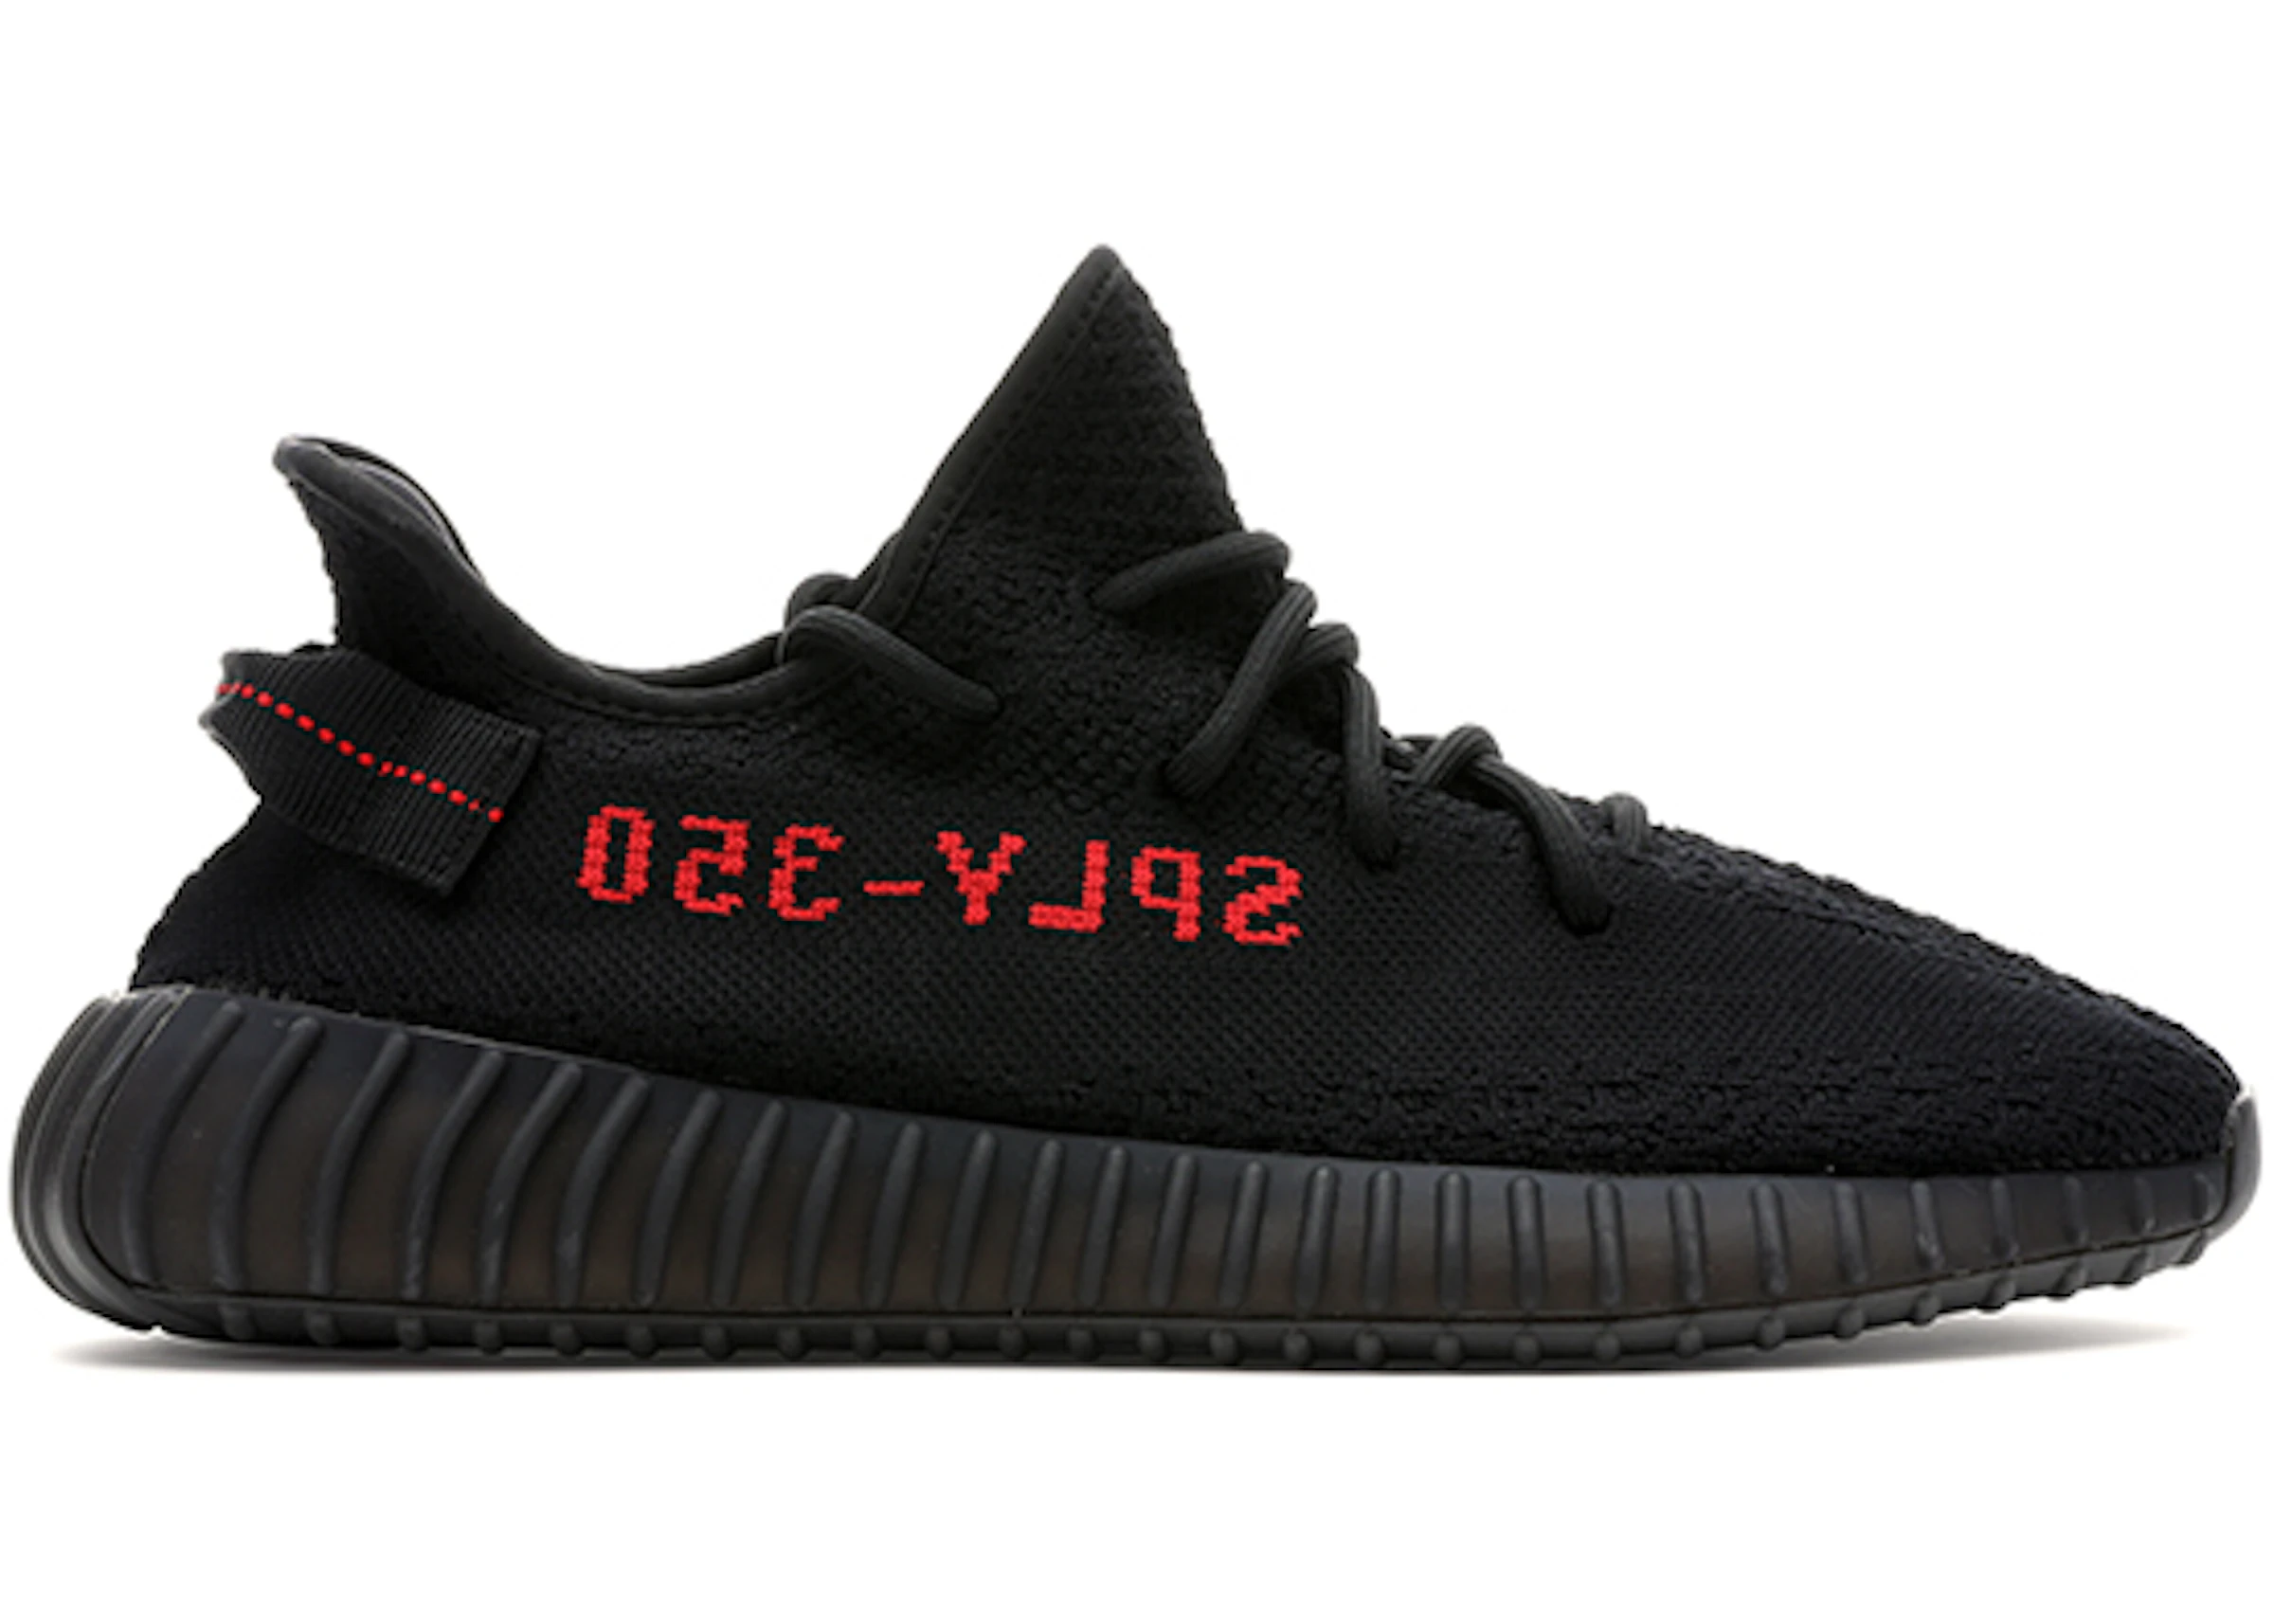 mild fake biography adidas Yeezy Boost 350 V2 Black Red (2017/2020) - CP9652 - US